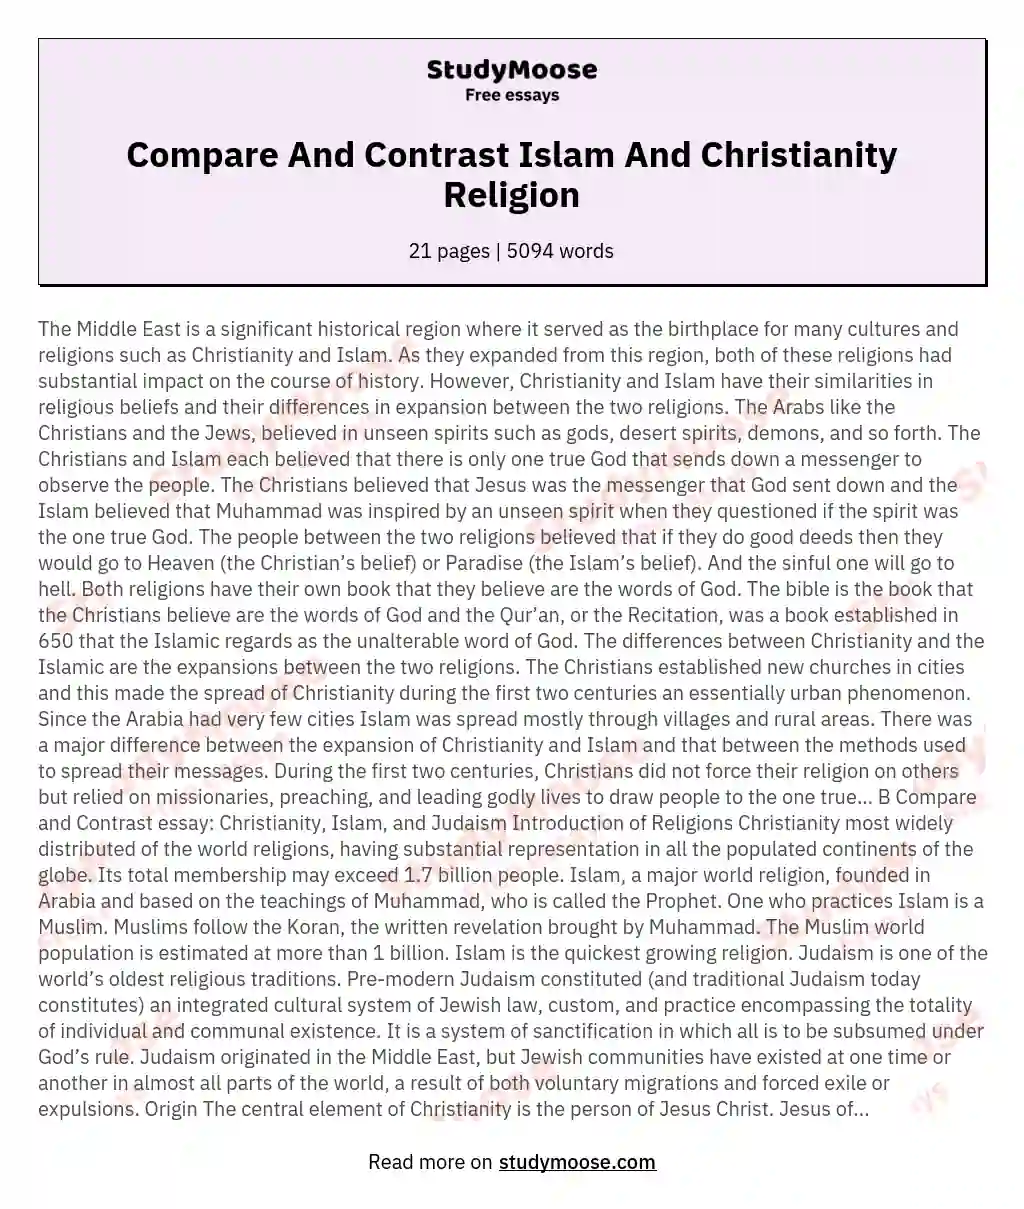 Compare And Contrast Islam And Christianity Religion